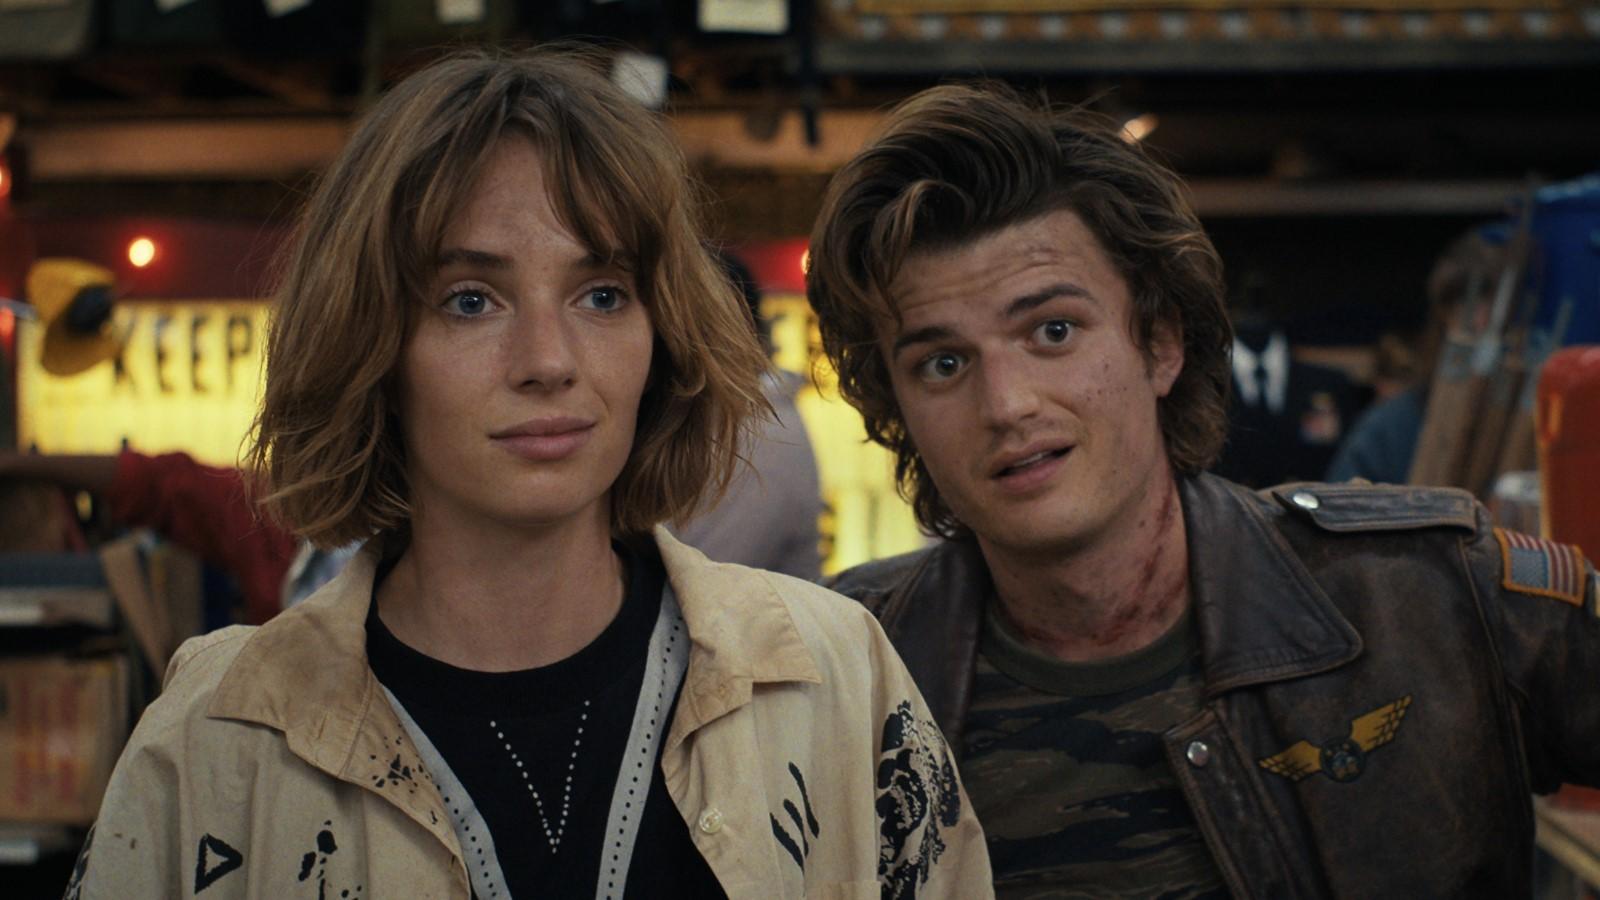 Maya Hawke and Joe Keery as Robin and Steve, covered in dirty and looking past the camera in Stranger Things